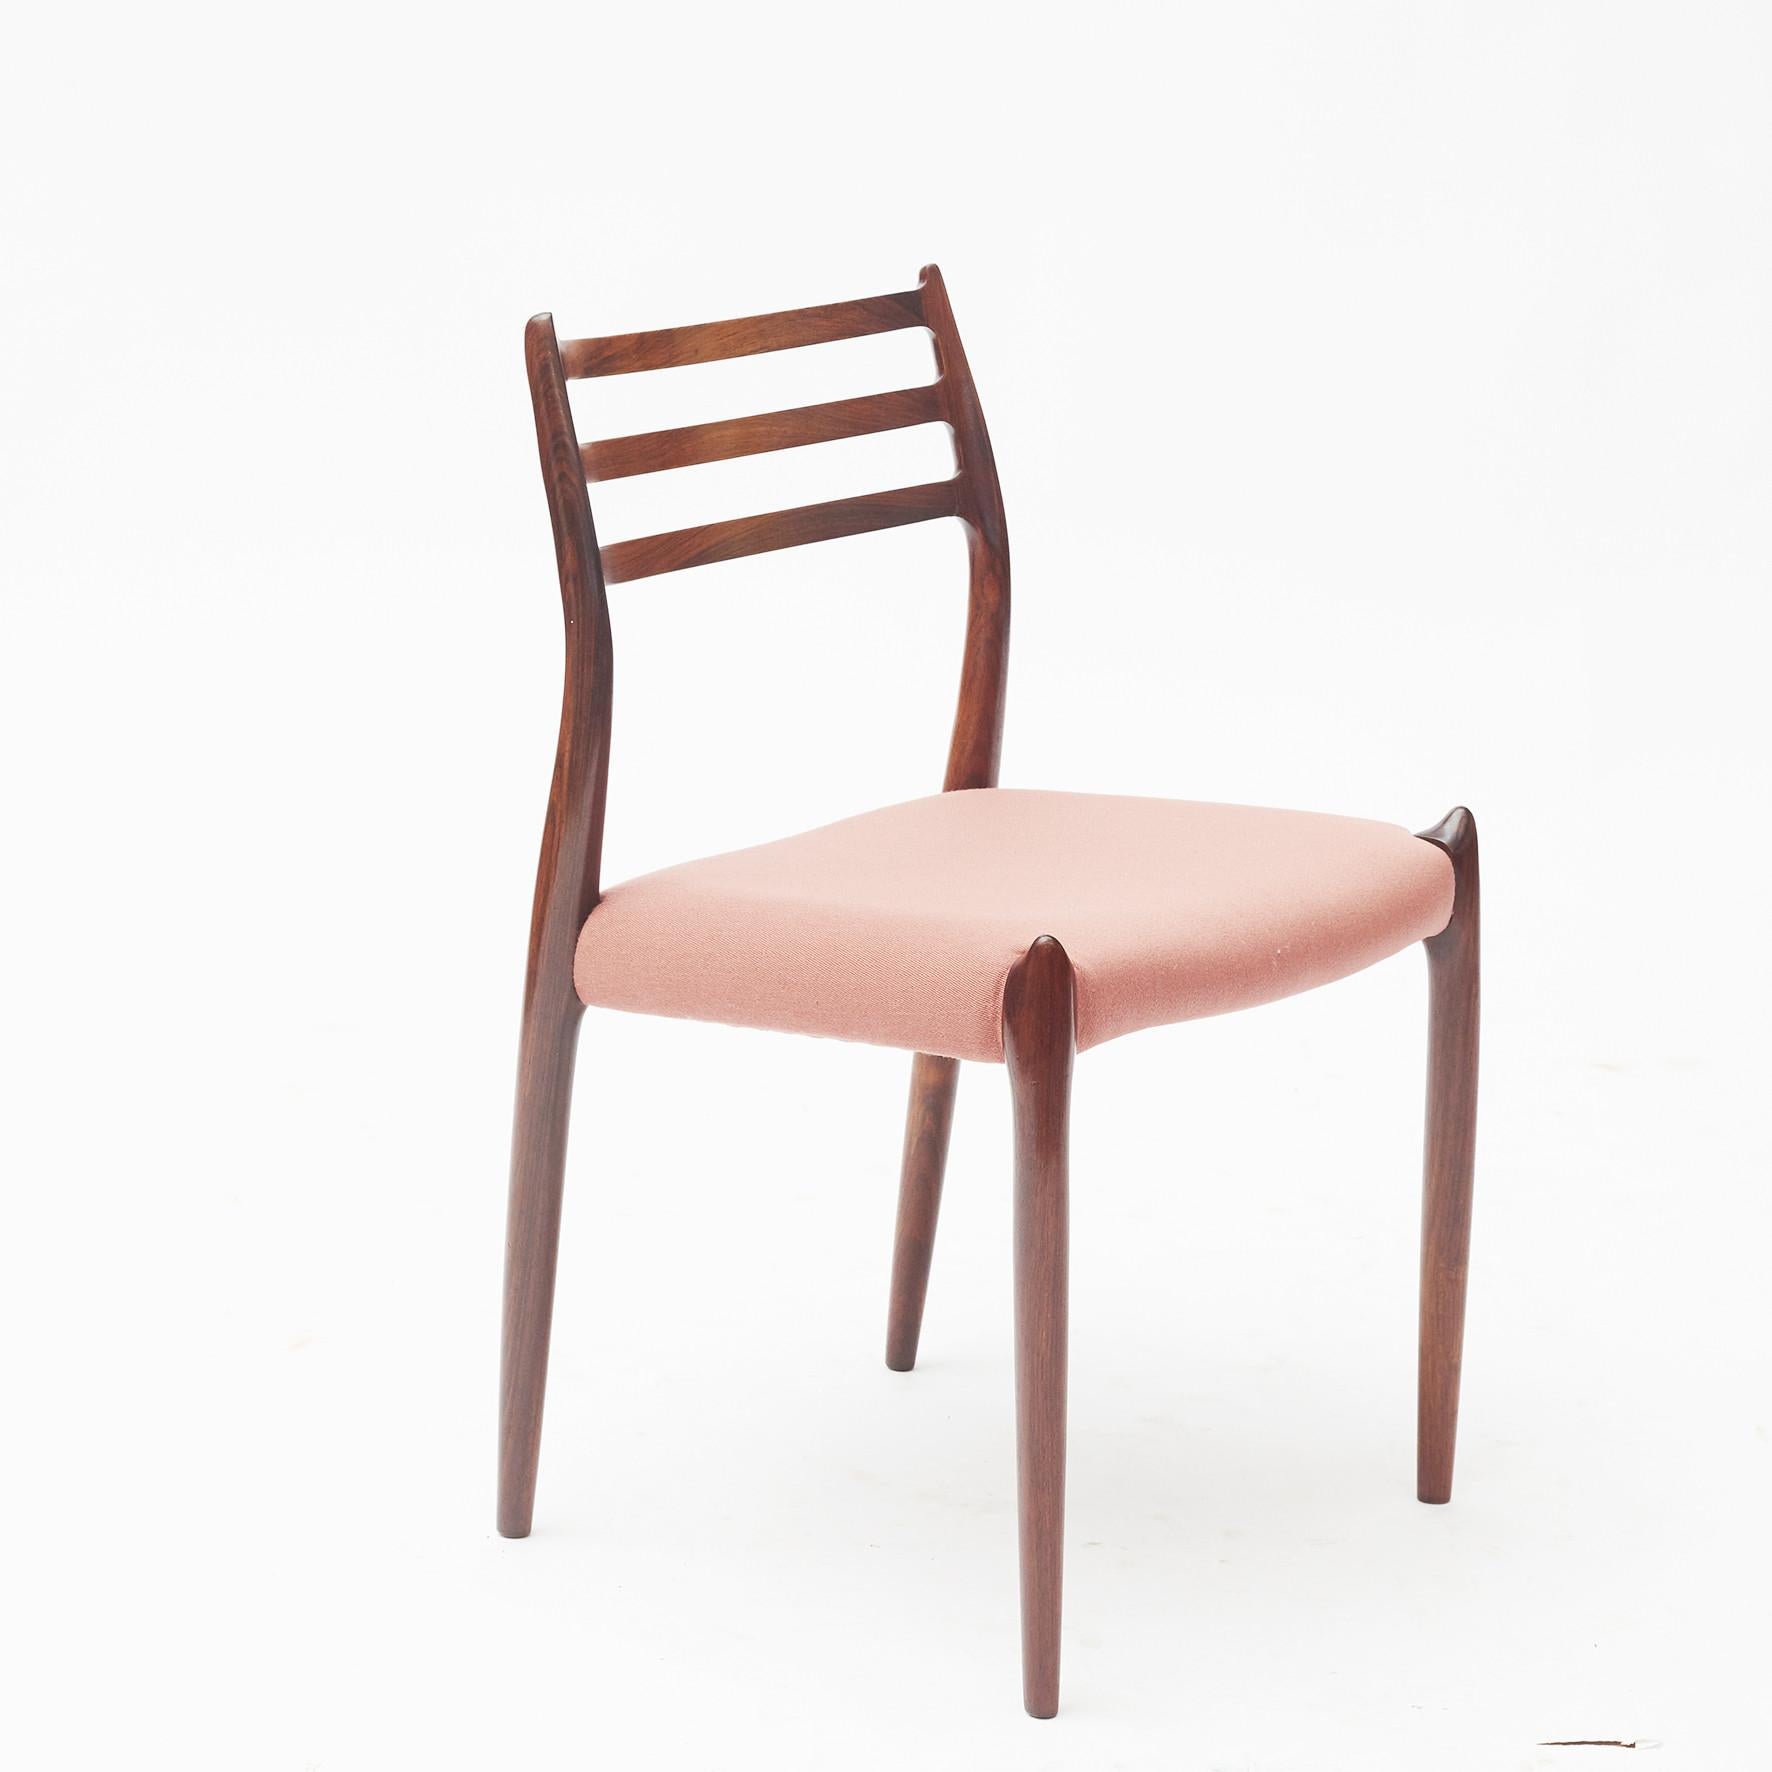 Niels Otto Møller, for J.L. Møllers Møbelfabrik.
Set of six dining chairs 'model nr. 78', in teak (Afromosia) and pale pink upholstery, Denmark, 1960s.
  